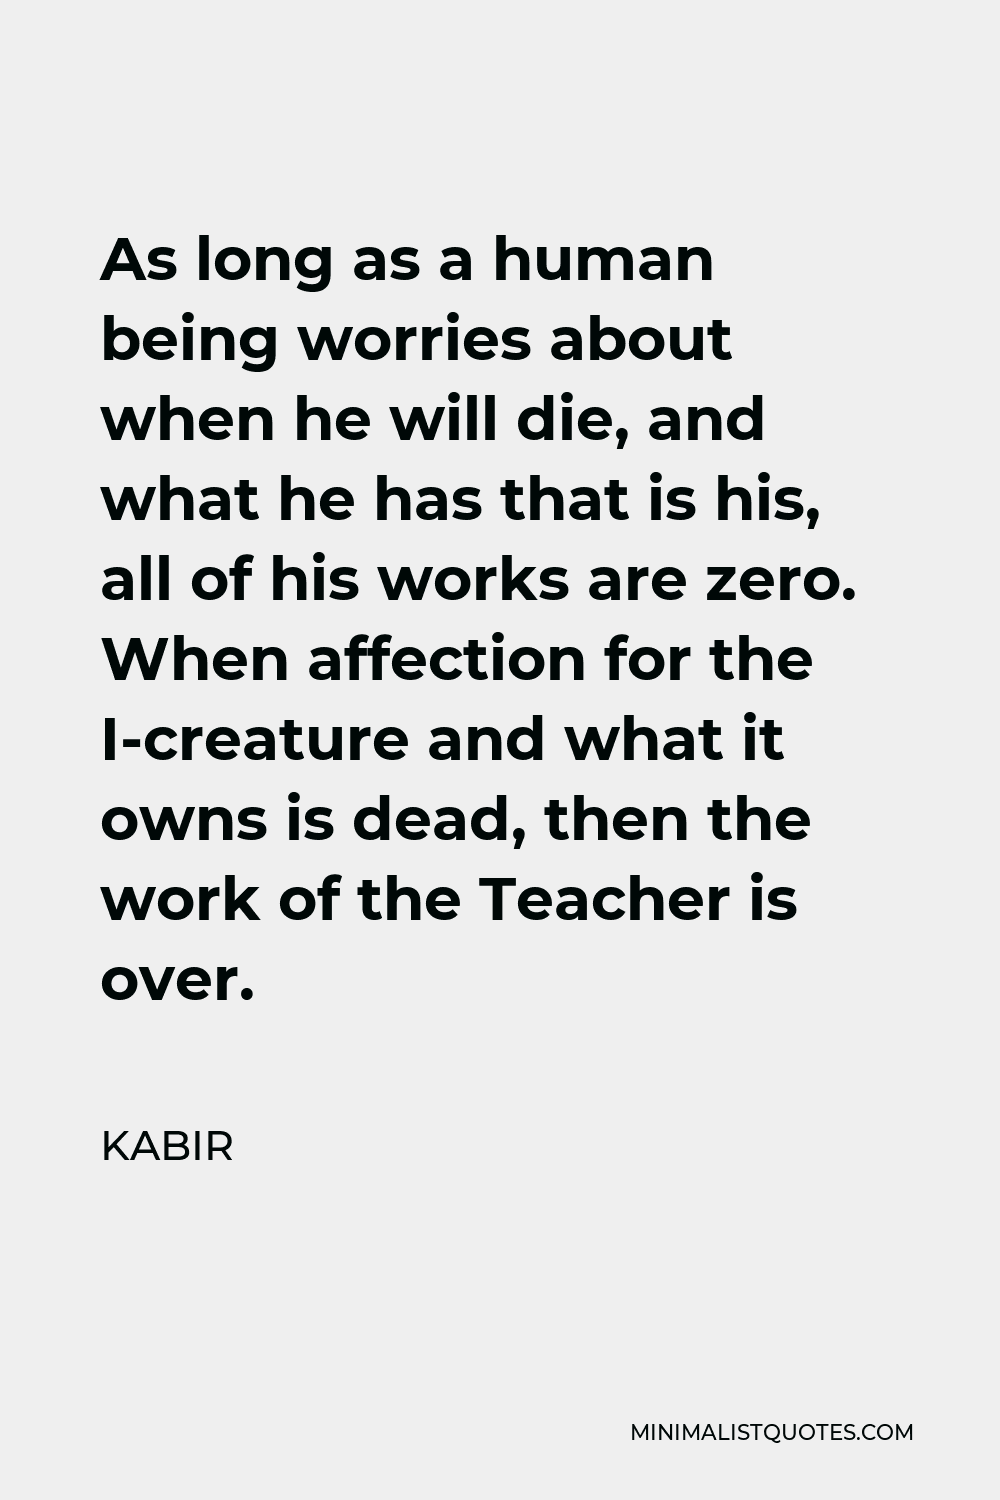 Kabir Quote - As long as a human being worries about when he will die, and what he has that is his, all of his works are zero. When affection for the I-creature and what it owns is dead, then the work of the Teacher is over.